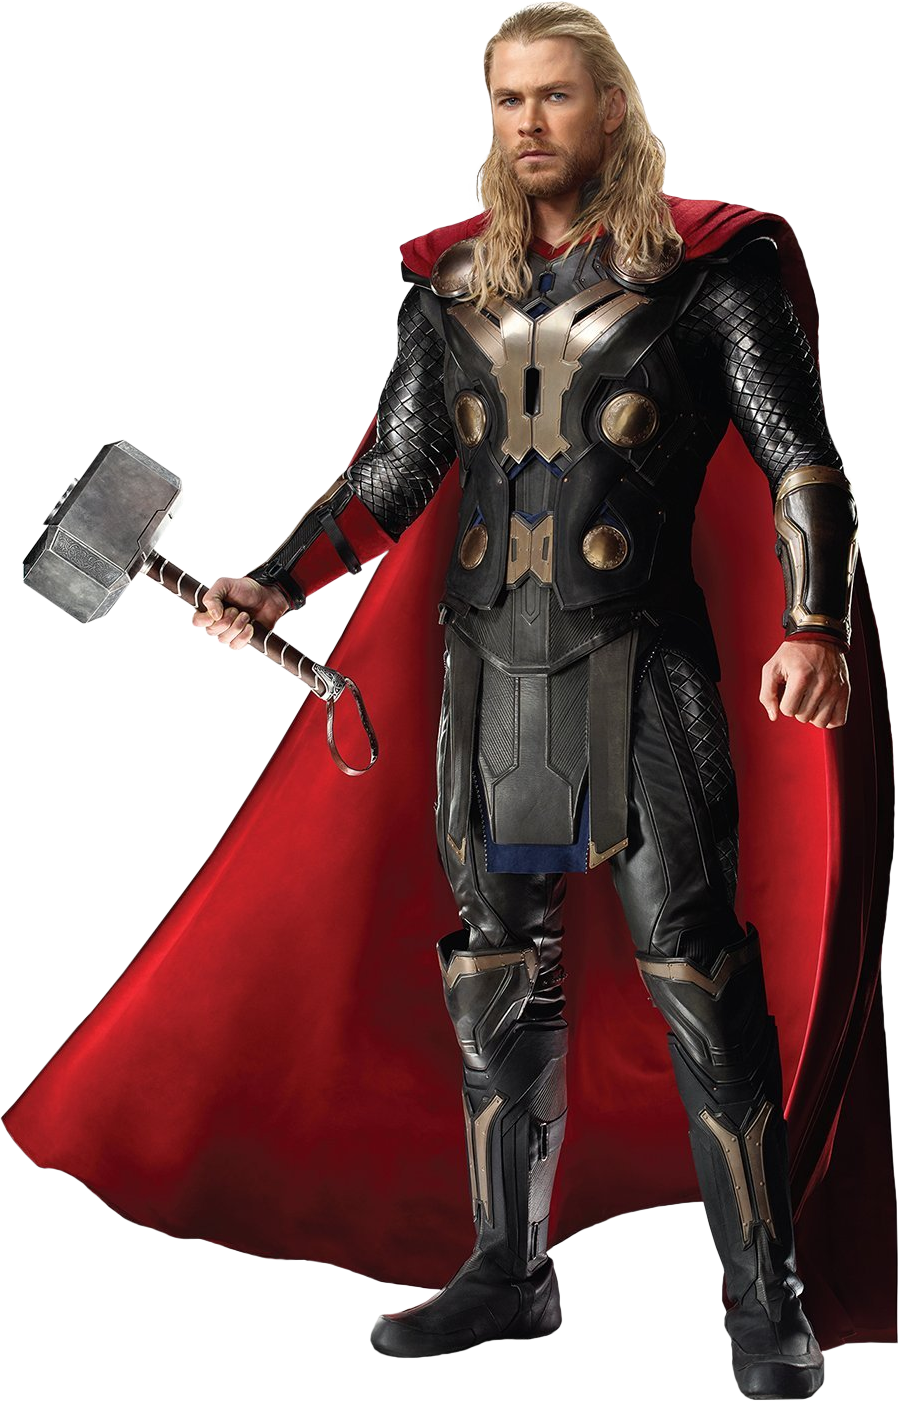 Thor images